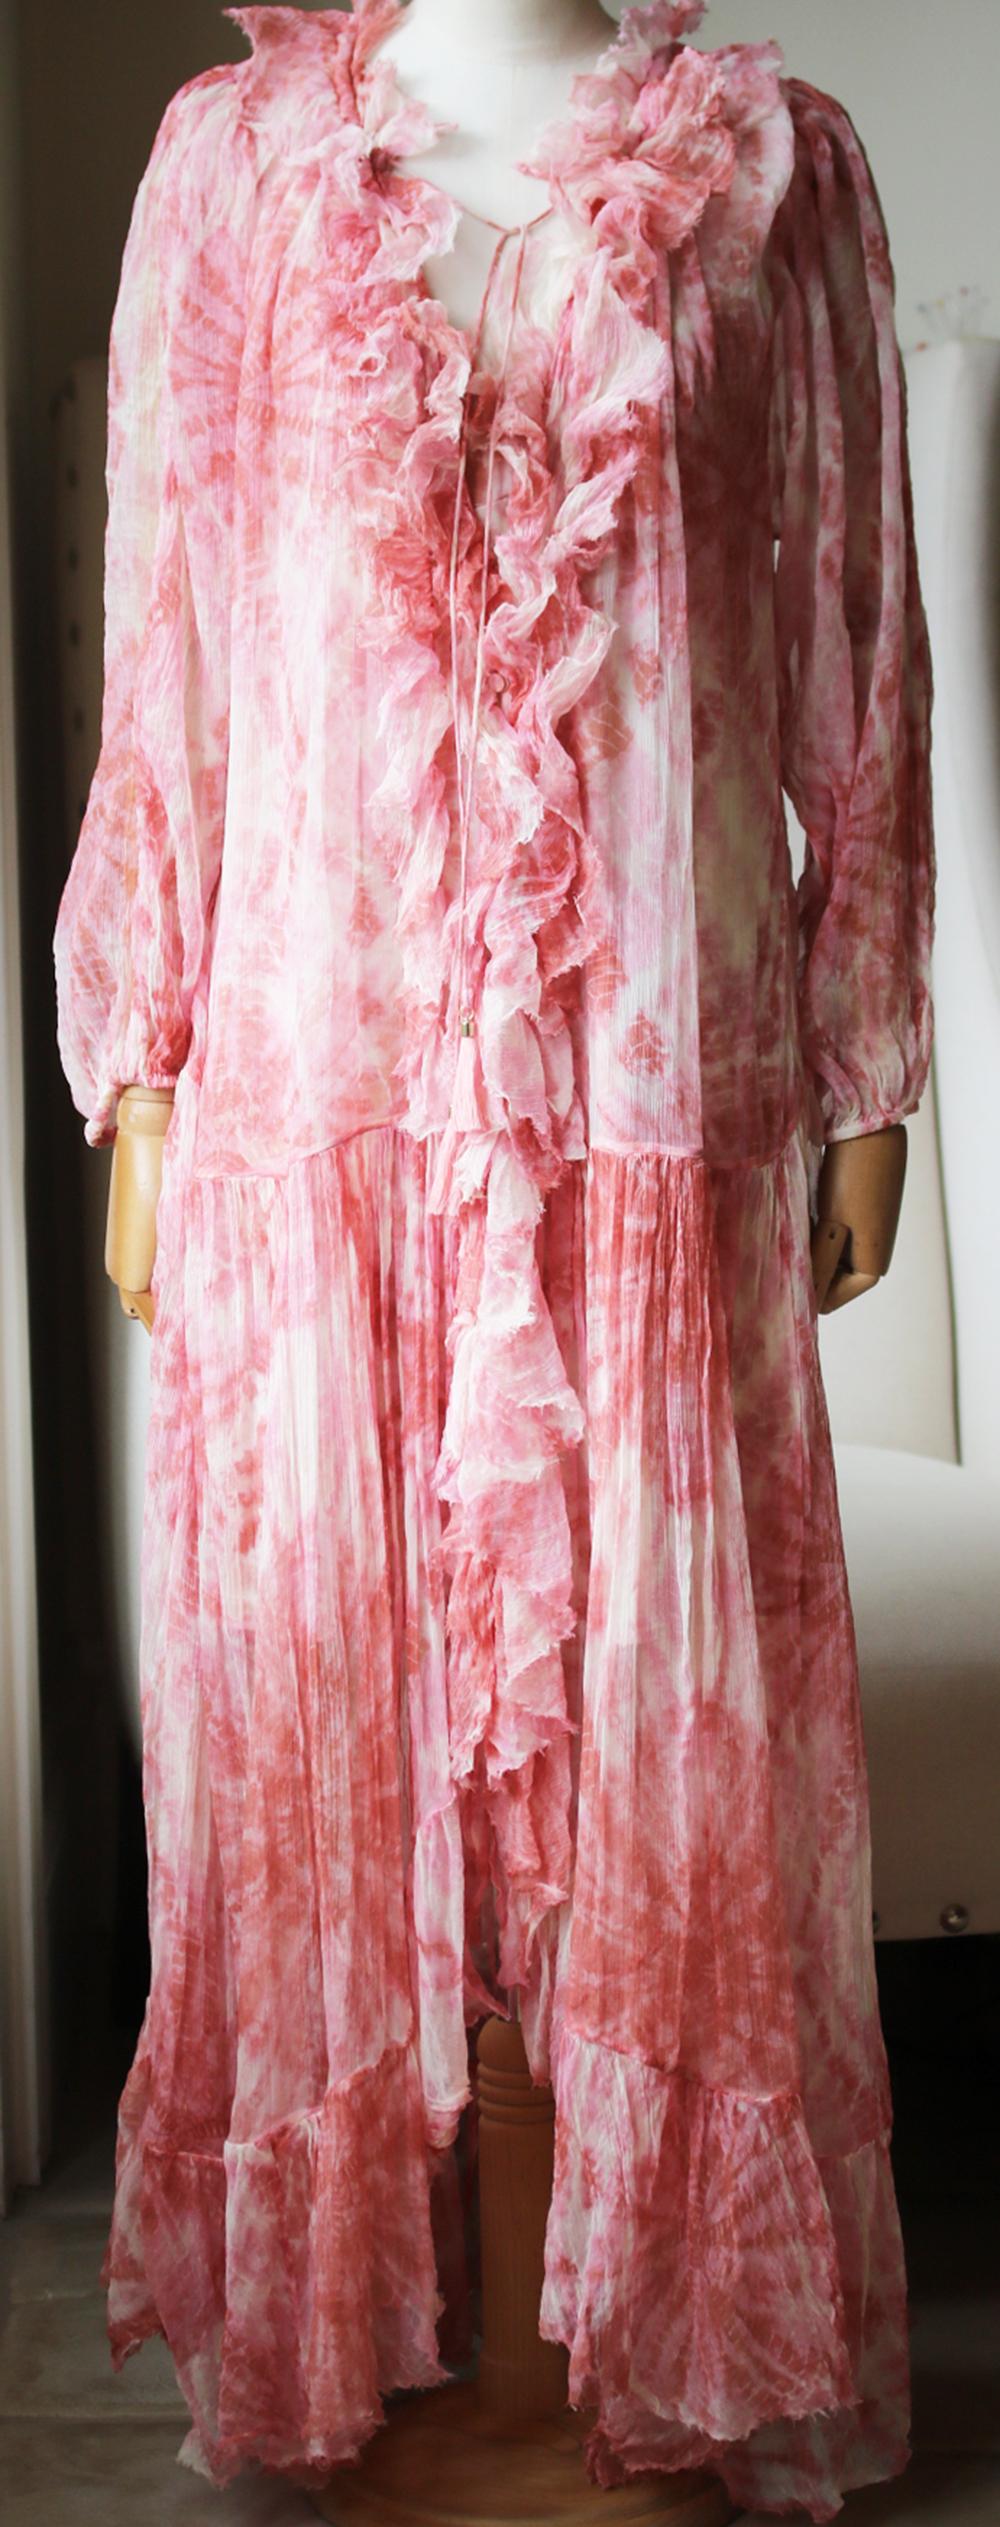 Zimmermann's Winsome Ruffle Robe is made from tie-dyed silk georgette for an elegant gown you'll never want to step out of. Material: 100% silk. Separate lining slip: 90% polyester, 10% elastane.

Size: 2 (UK 12, US 8, FR 40, IT 44)

Condition: As